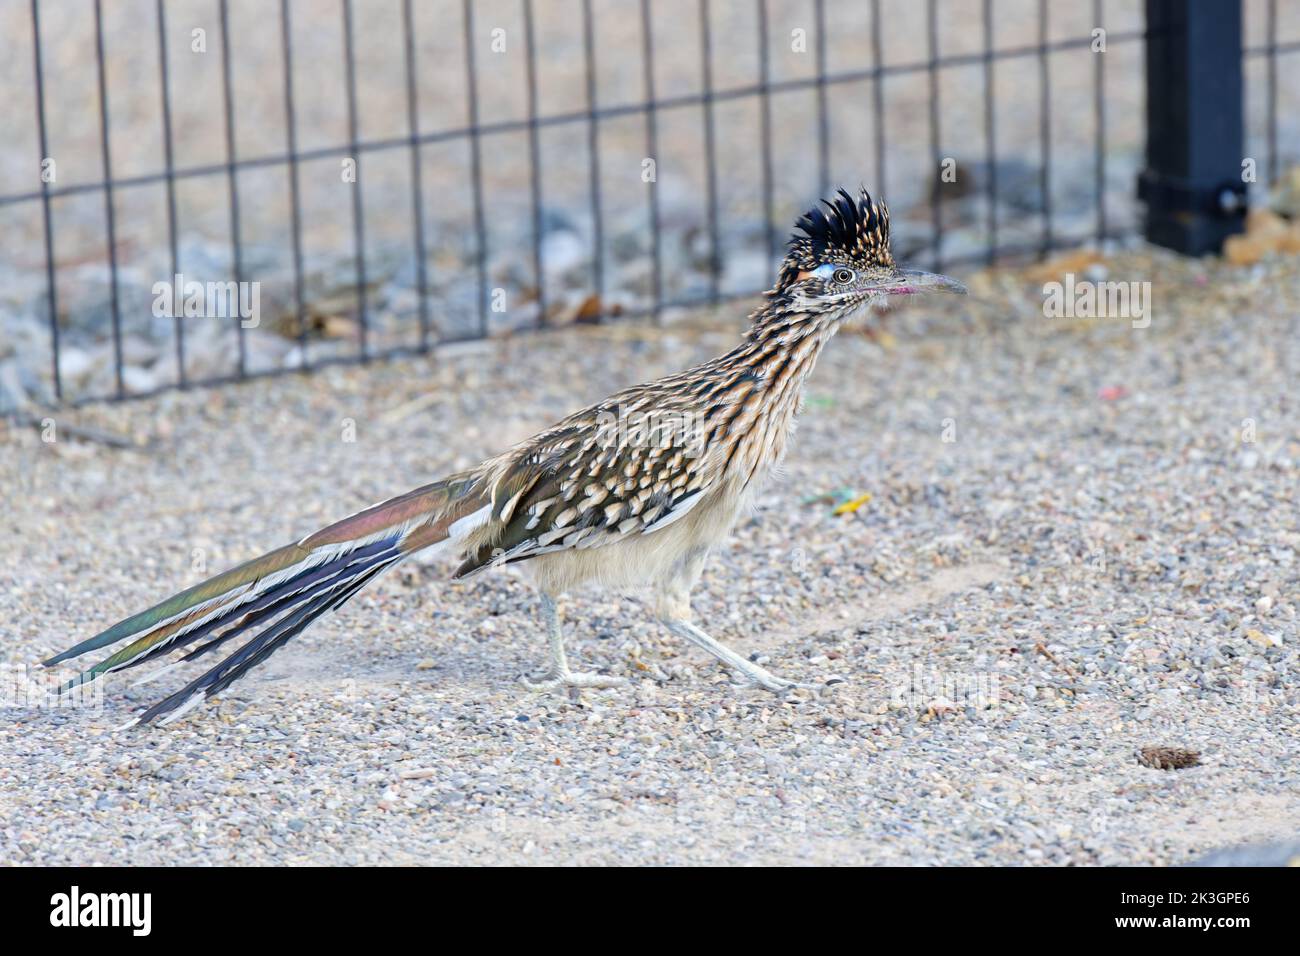 A beautiful Greater Roadrunner (genus Geococcyx) is seen moving warily through a children's playground in Albuequerque, New Mexico. Stock Photo